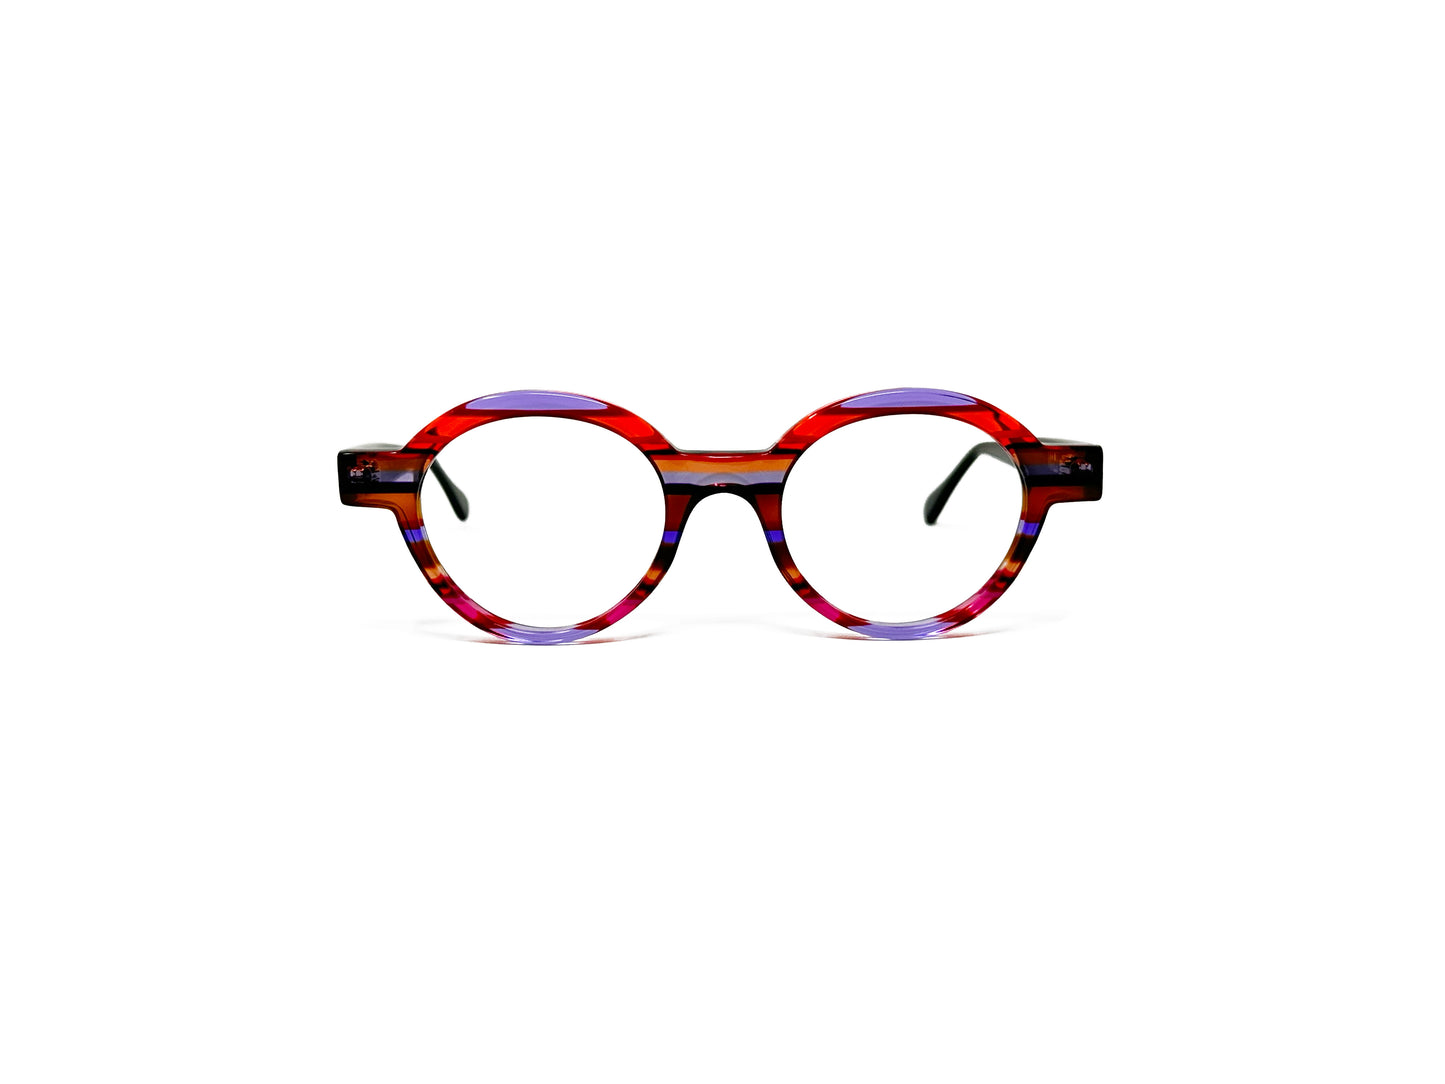 Viktlos round acetate optical frame. Model: 2969. Color: 1776/35 - Purple, red, and pink transparent stripes. Front view. 